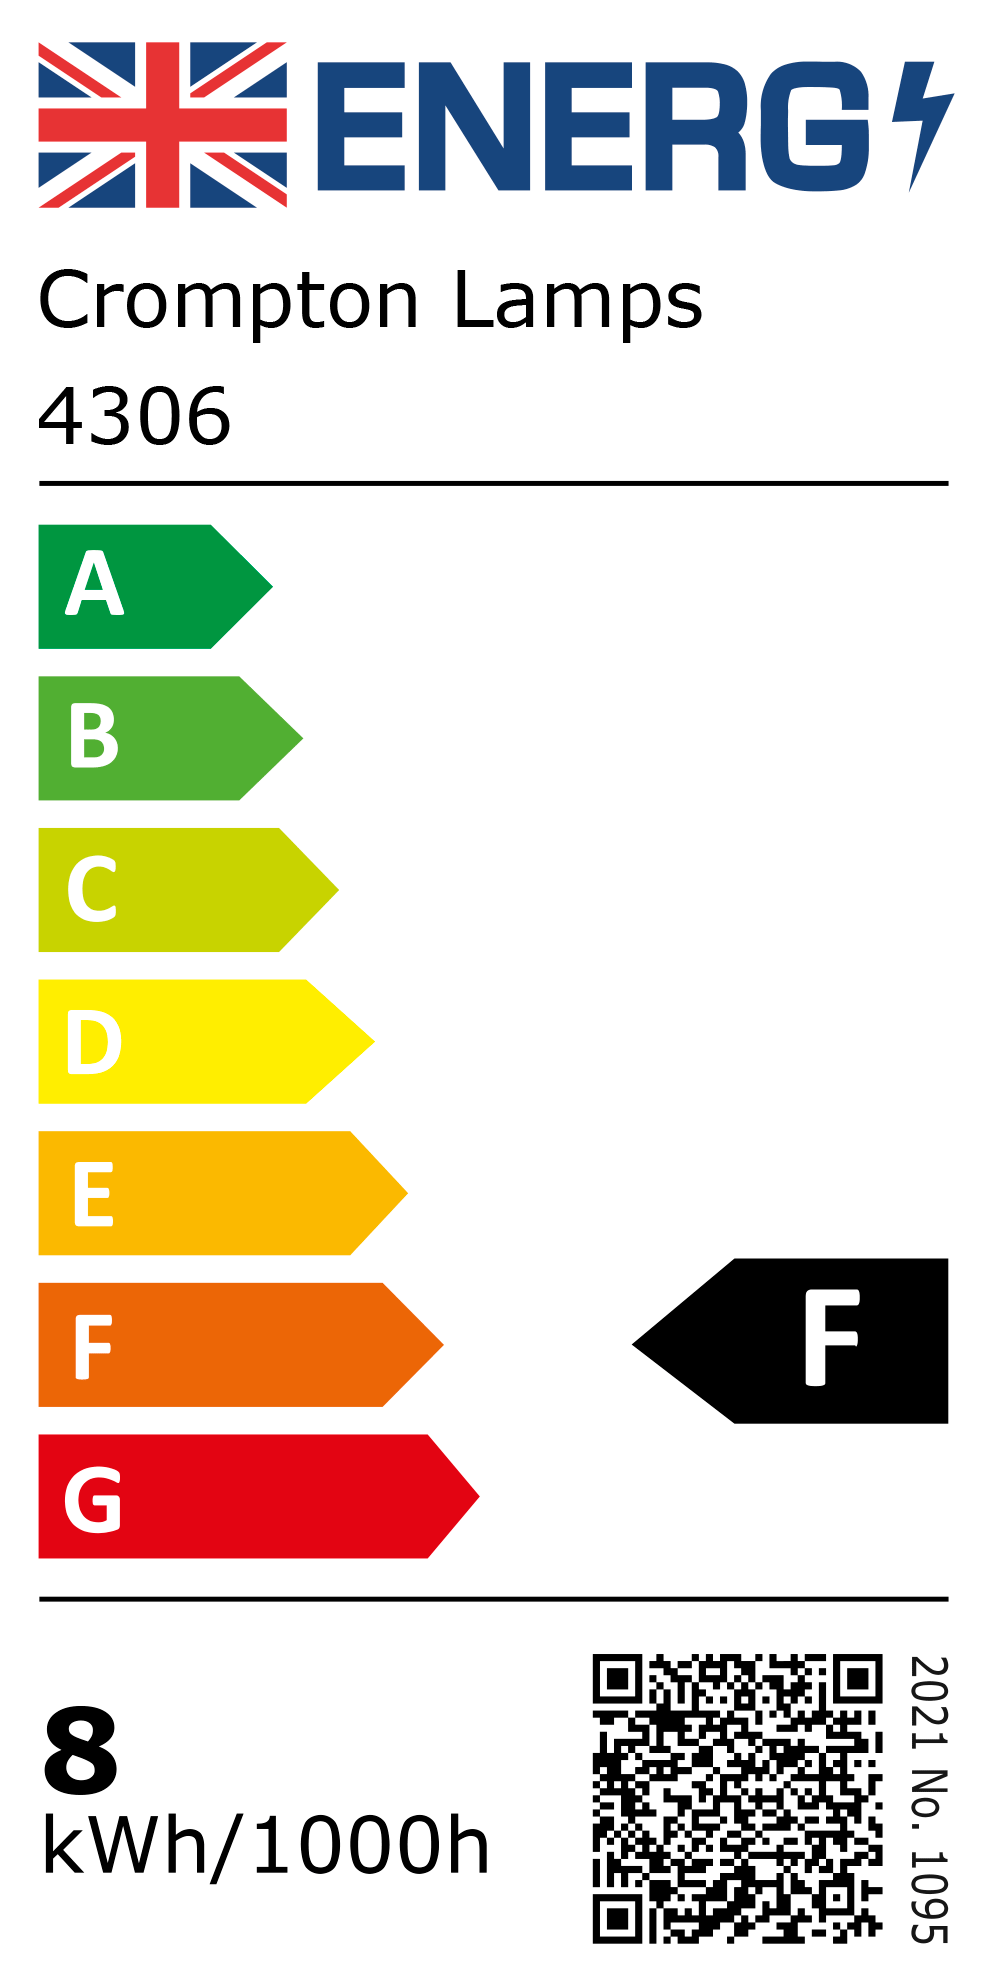 New 2021 Energy Rating Label: Stock Code 4306